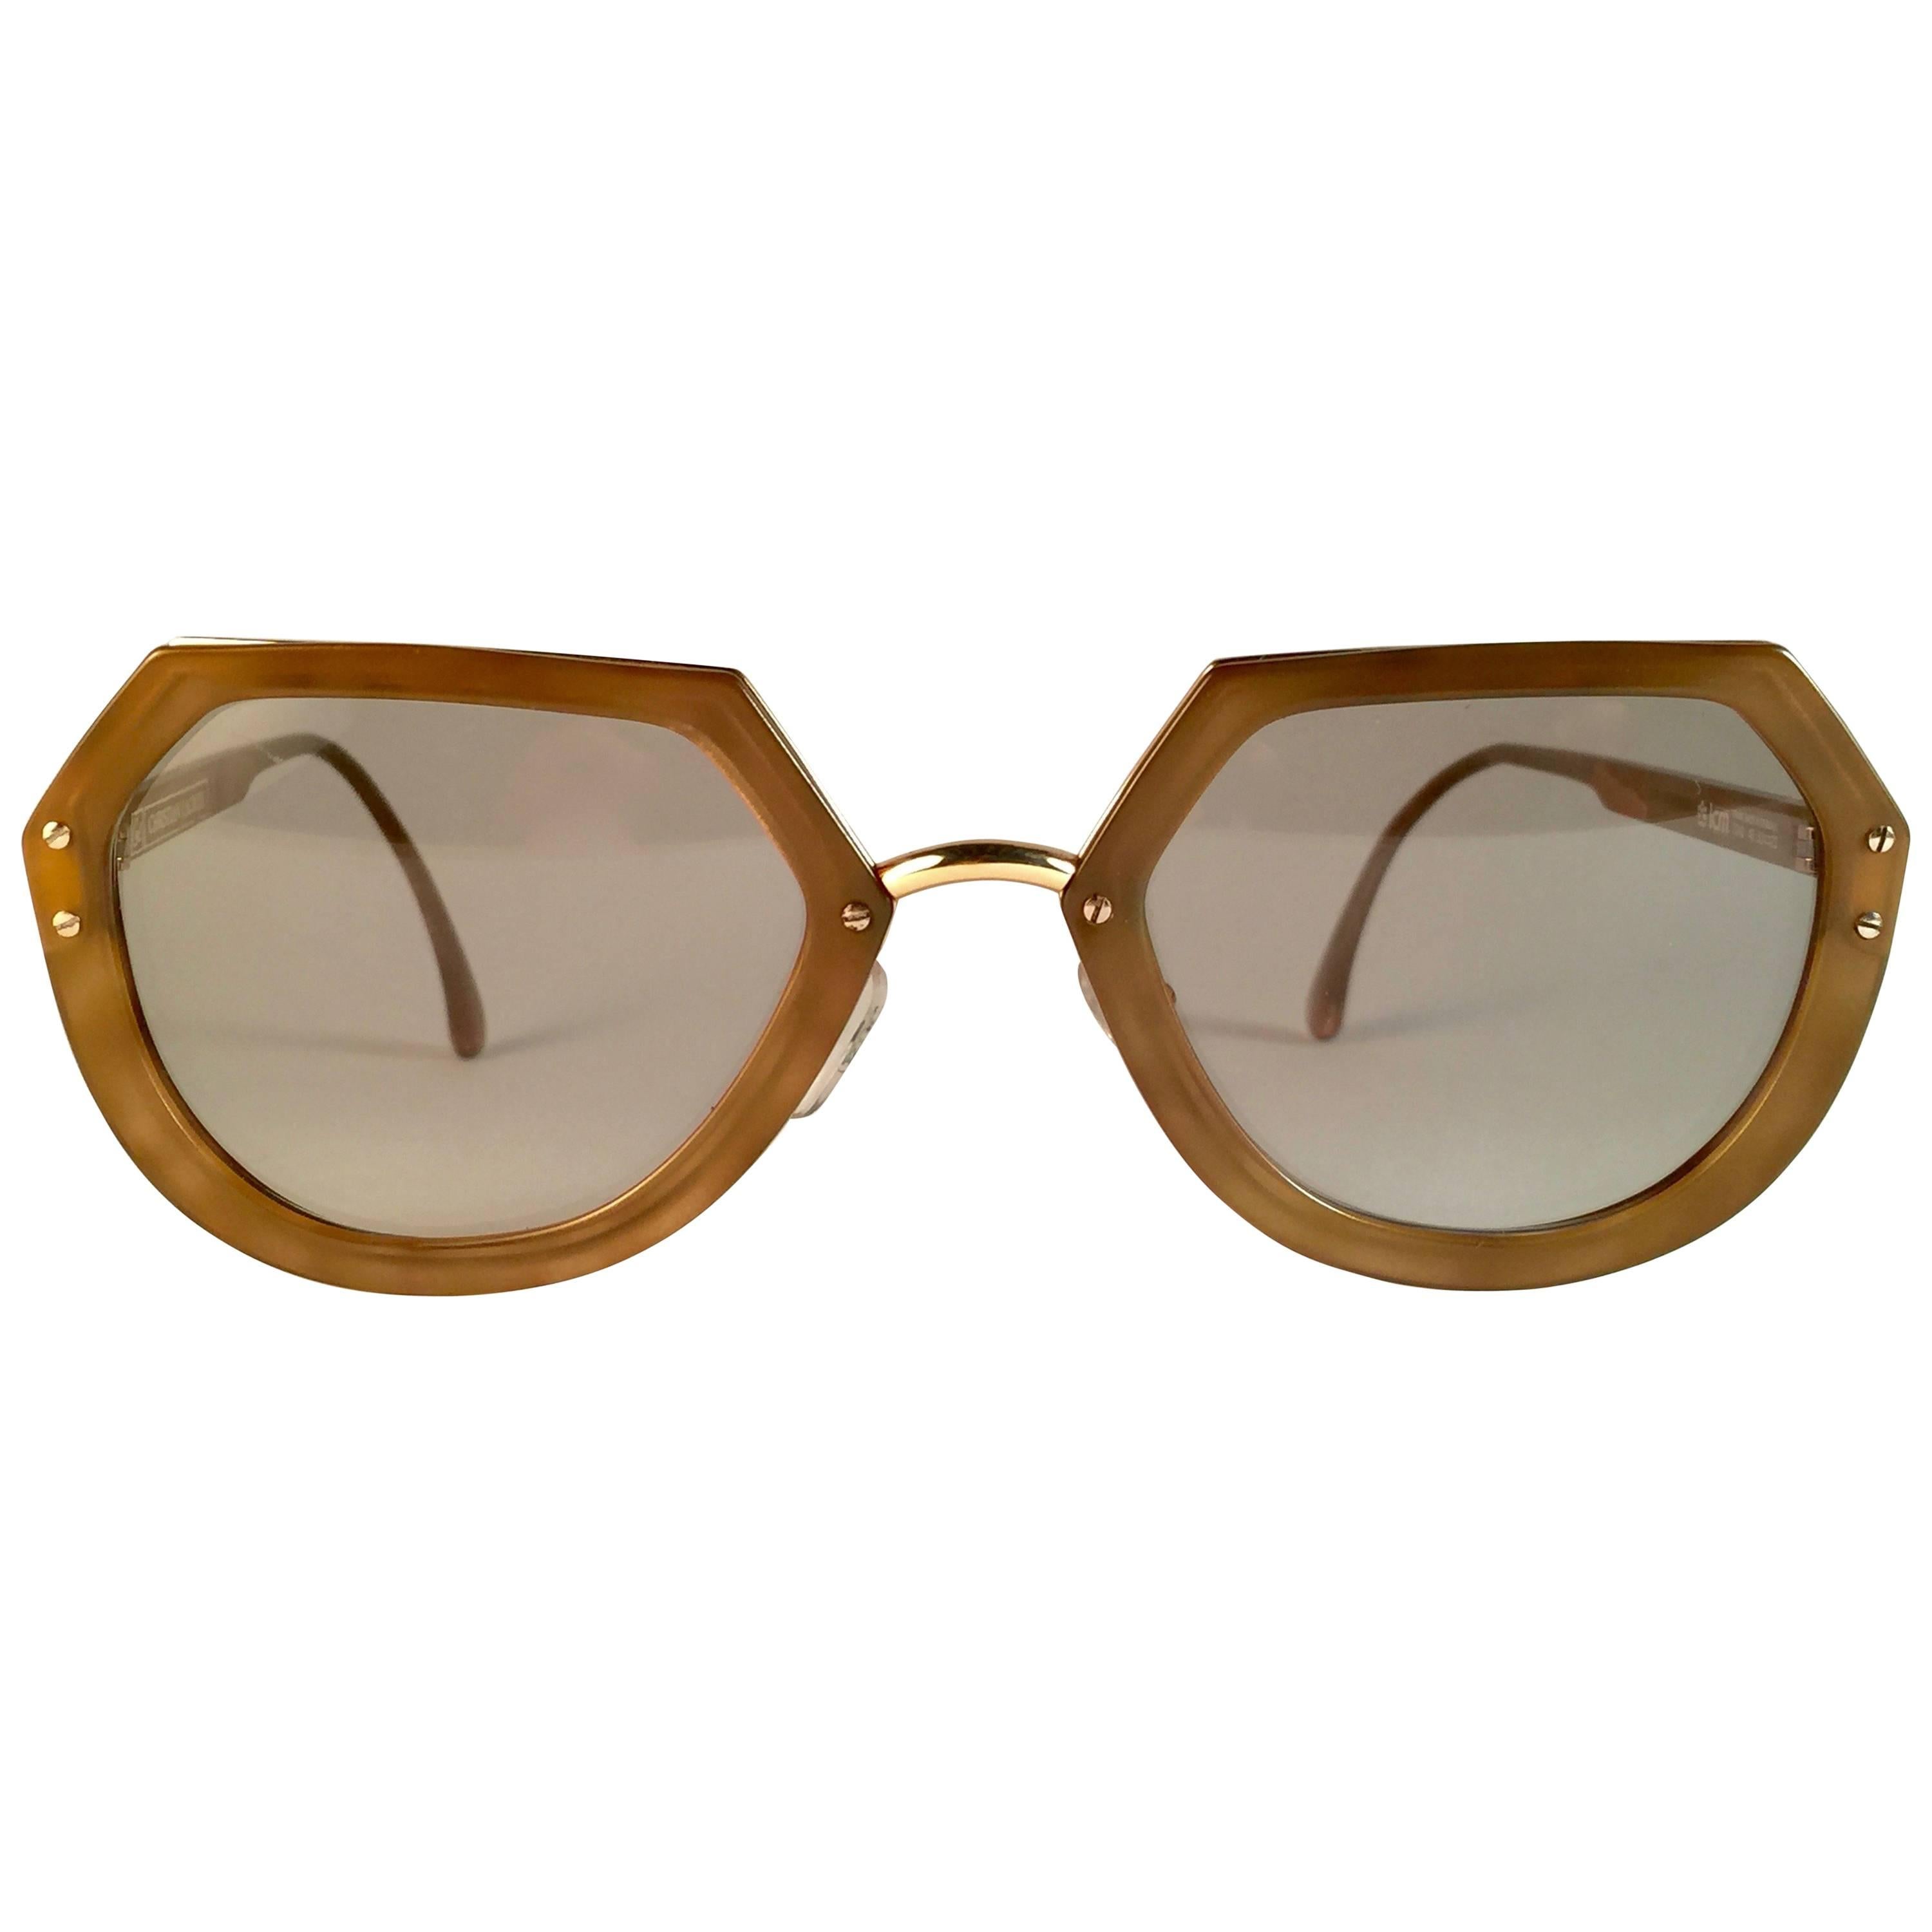 New Vintage Christian Lacroix Ocre Gold Accents 1980 France Sunglass